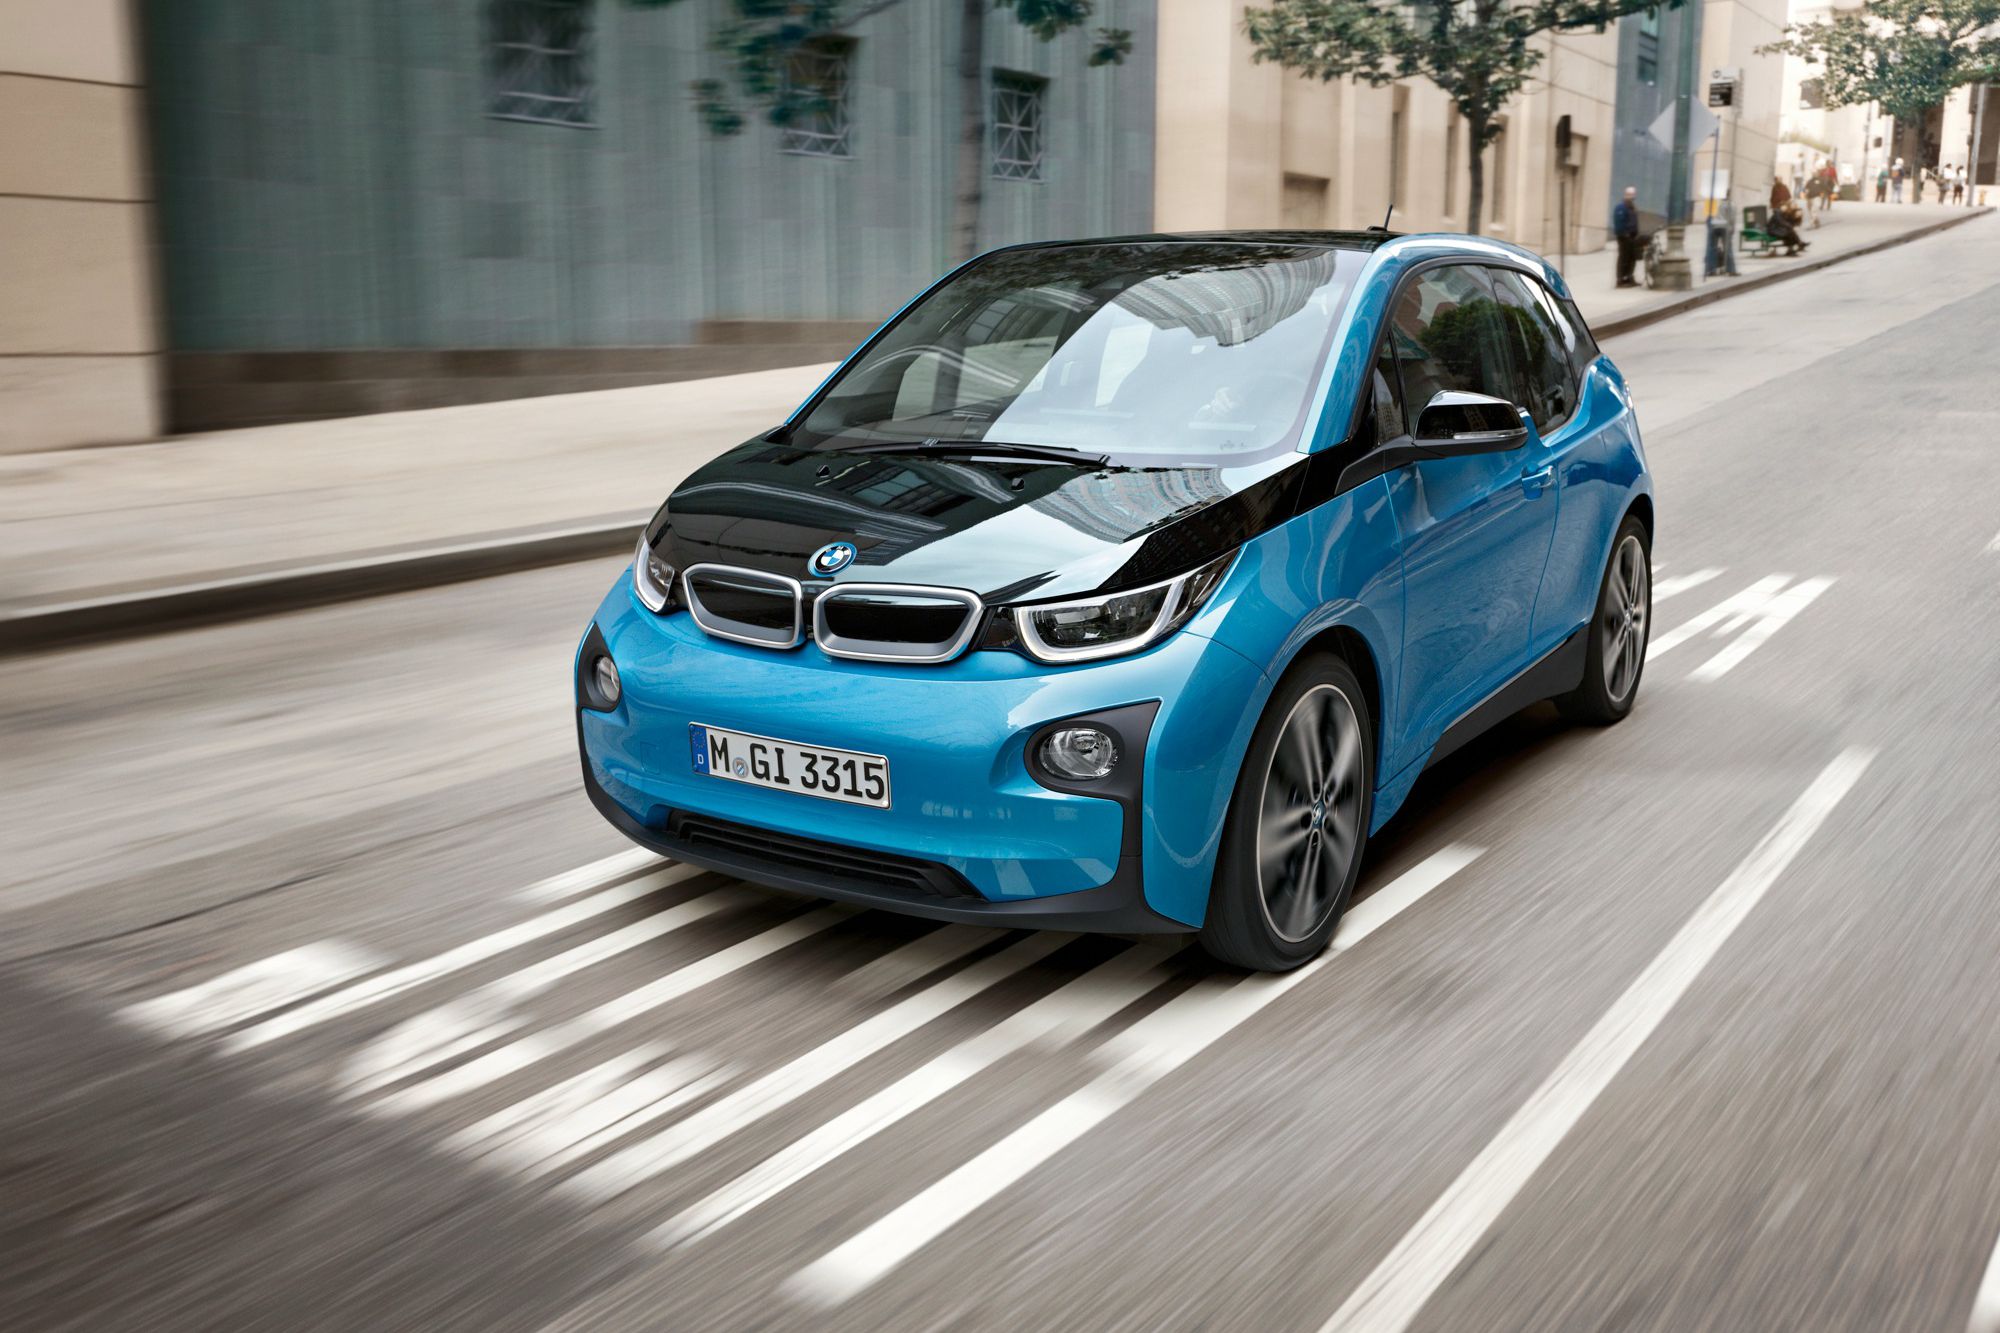 BMW's i3 electric car getting a bigger battery, 114-mile range - The Verge